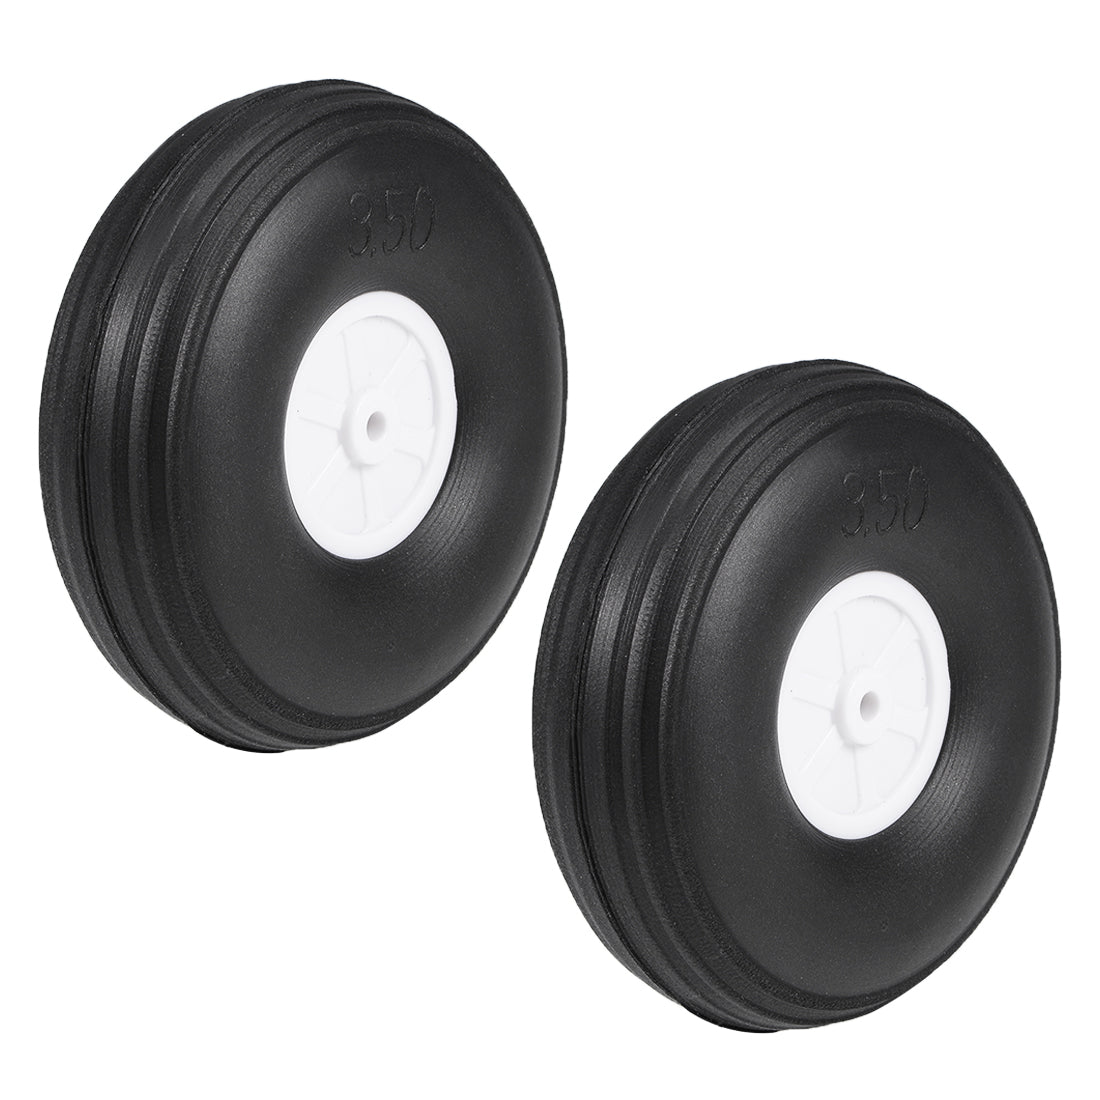 uxcell Uxcell Tire and Wheel Sets for RC Airplane,PU Sponge Tire with Plastic Hub,3.5" 2pcs